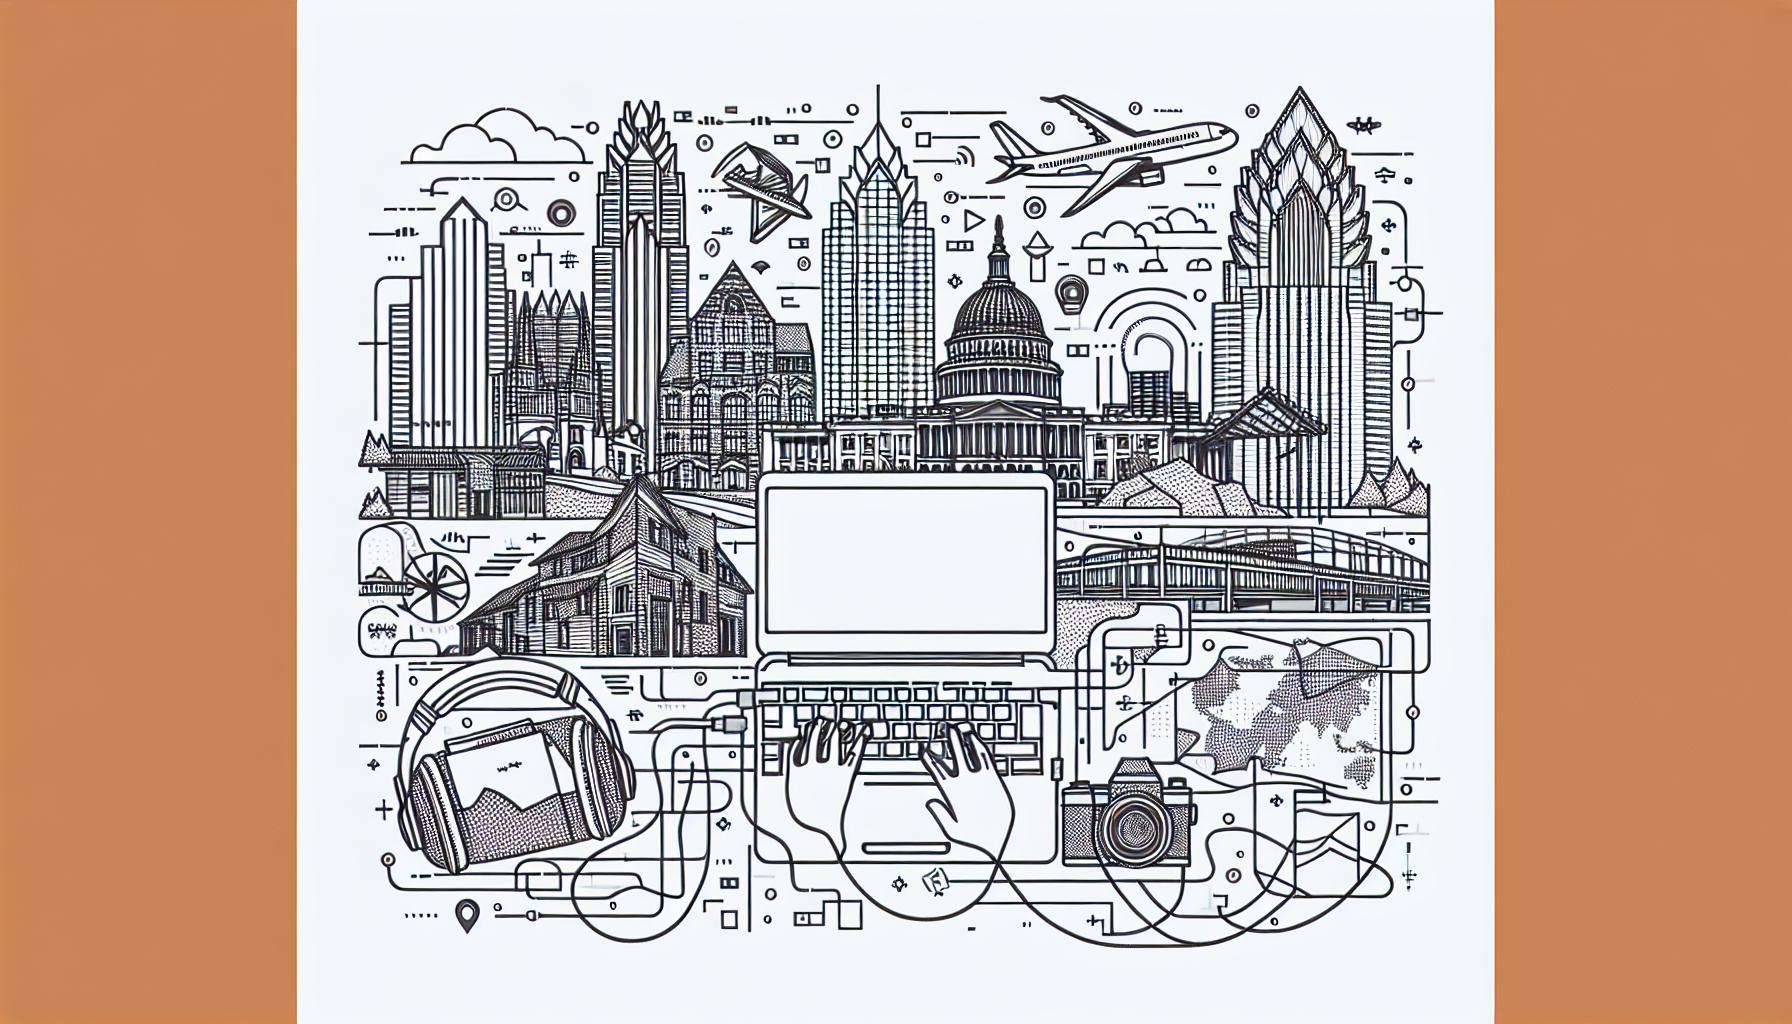 Destinations Top 5 Best US Cities for Digital Nomads ReallyRemoteWorker Discover the best cities for digital nomads in the USA in this insightful article. Explore why Austin, Portland, Denver, Miami, and Boulder stand out with qualities like vibrant music and art scenes, affordable living, picturesque landscapes and a balanced lifestyle. Plus, get an overview of the average monthly expenses in each city.